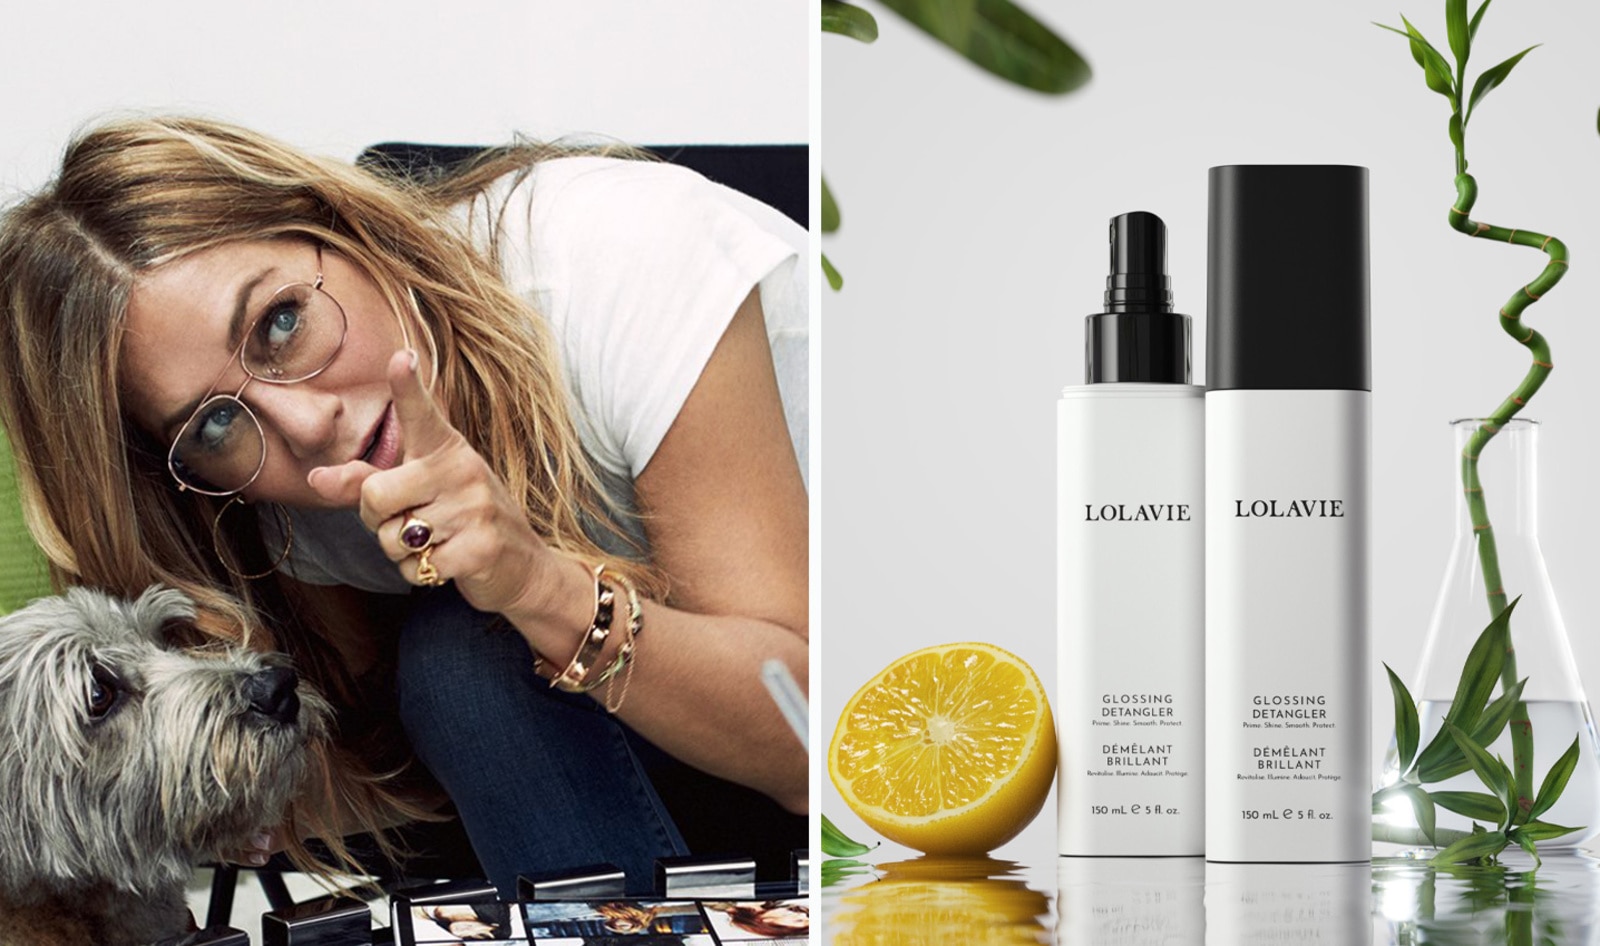 Jennifer Aniston's Glossing Detangler Took About 5 Years To Develop and Her Customers are Ecstatic about it